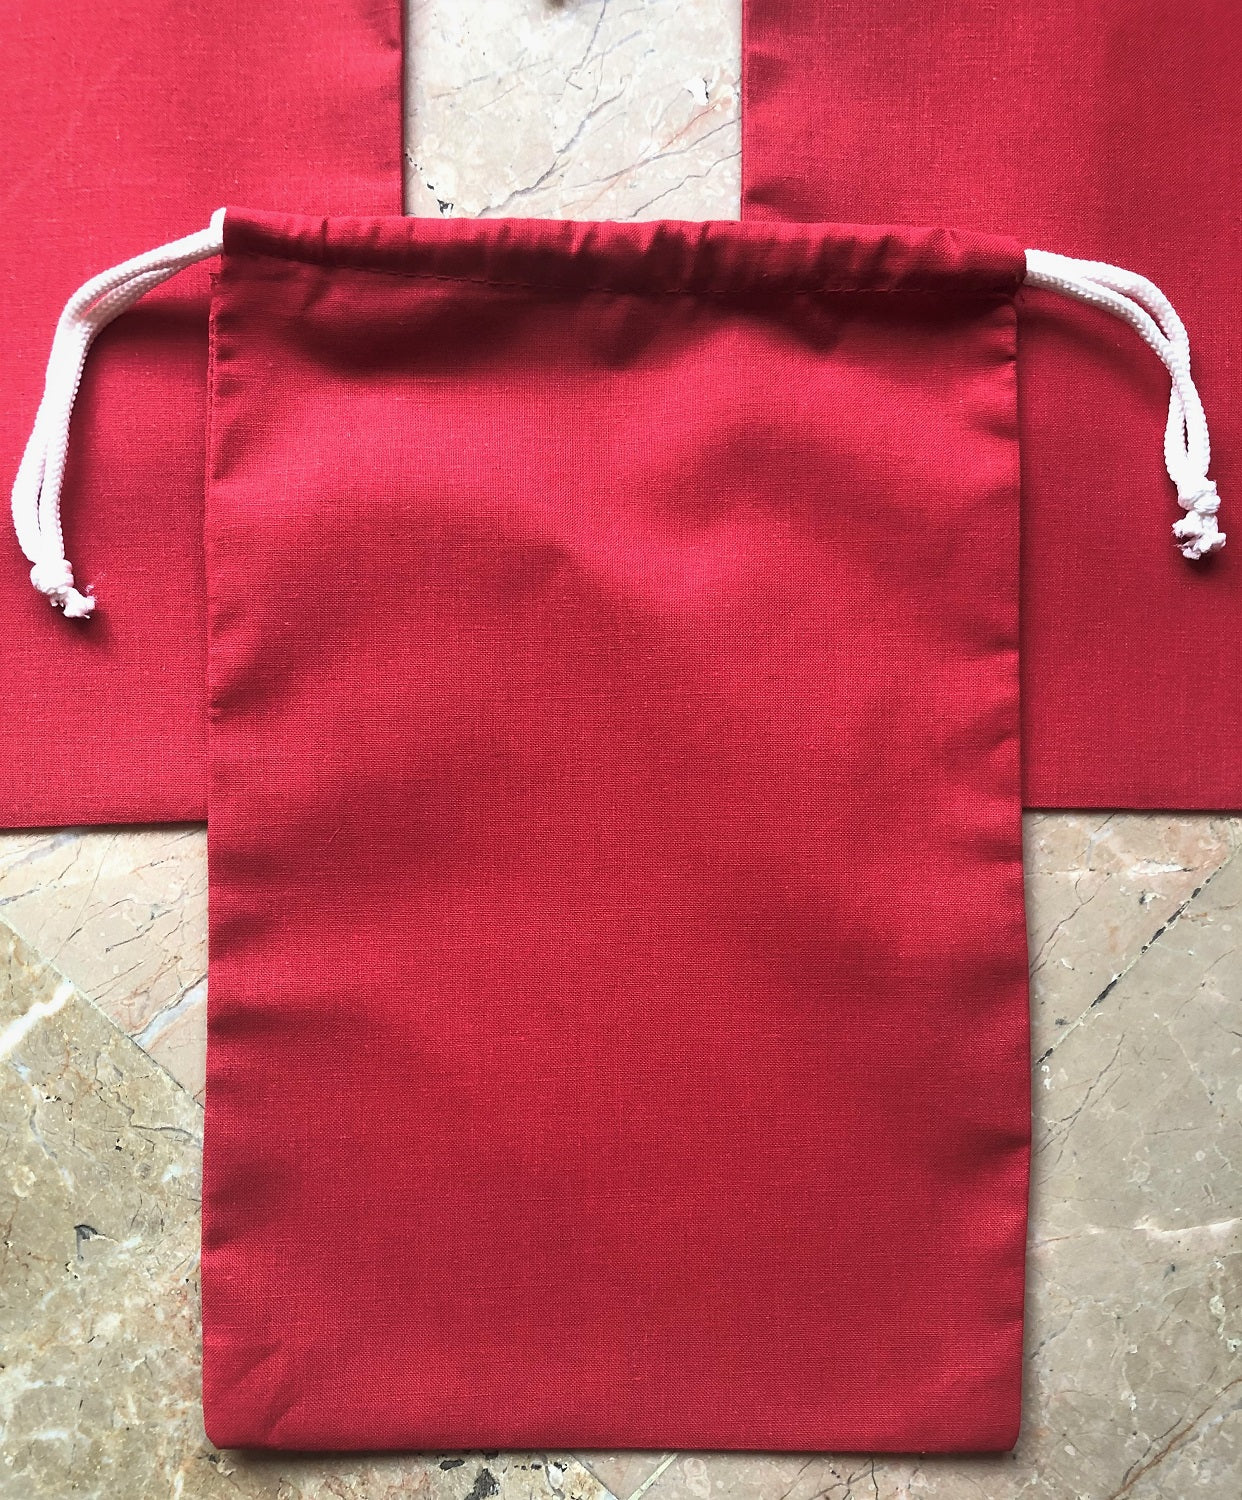 6x8 Inches Reusable Eco-Friendly Cotton Double Drawstring Bags Red Color